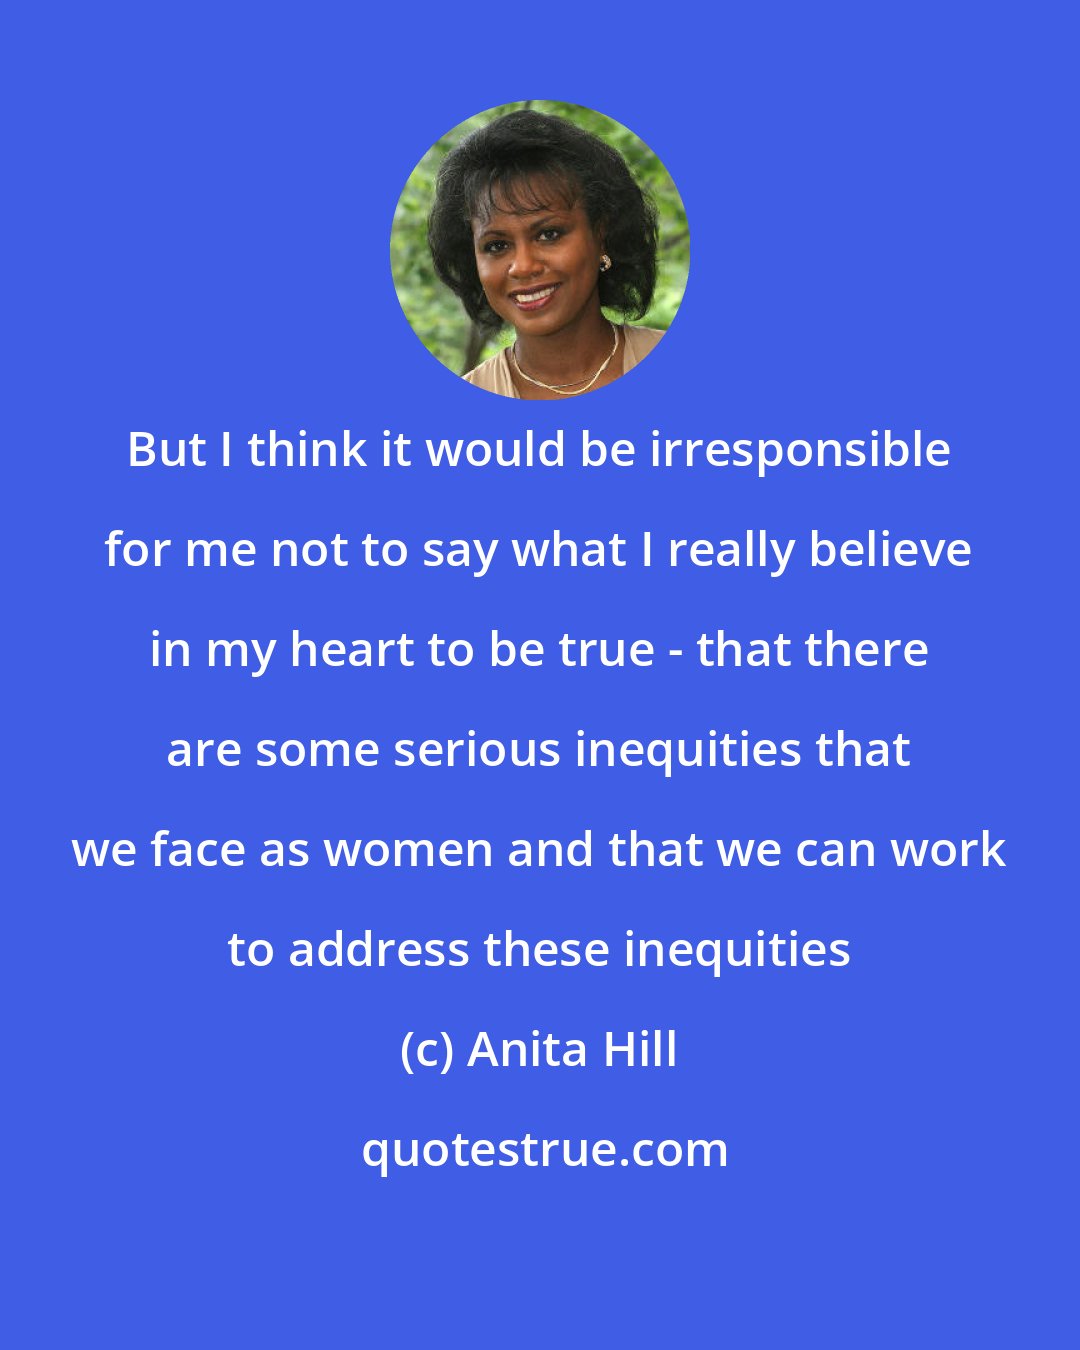 Anita Hill: But I think it would be irresponsible for me not to say what I really believe in my heart to be true - that there are some serious inequities that we face as women and that we can work to address these inequities